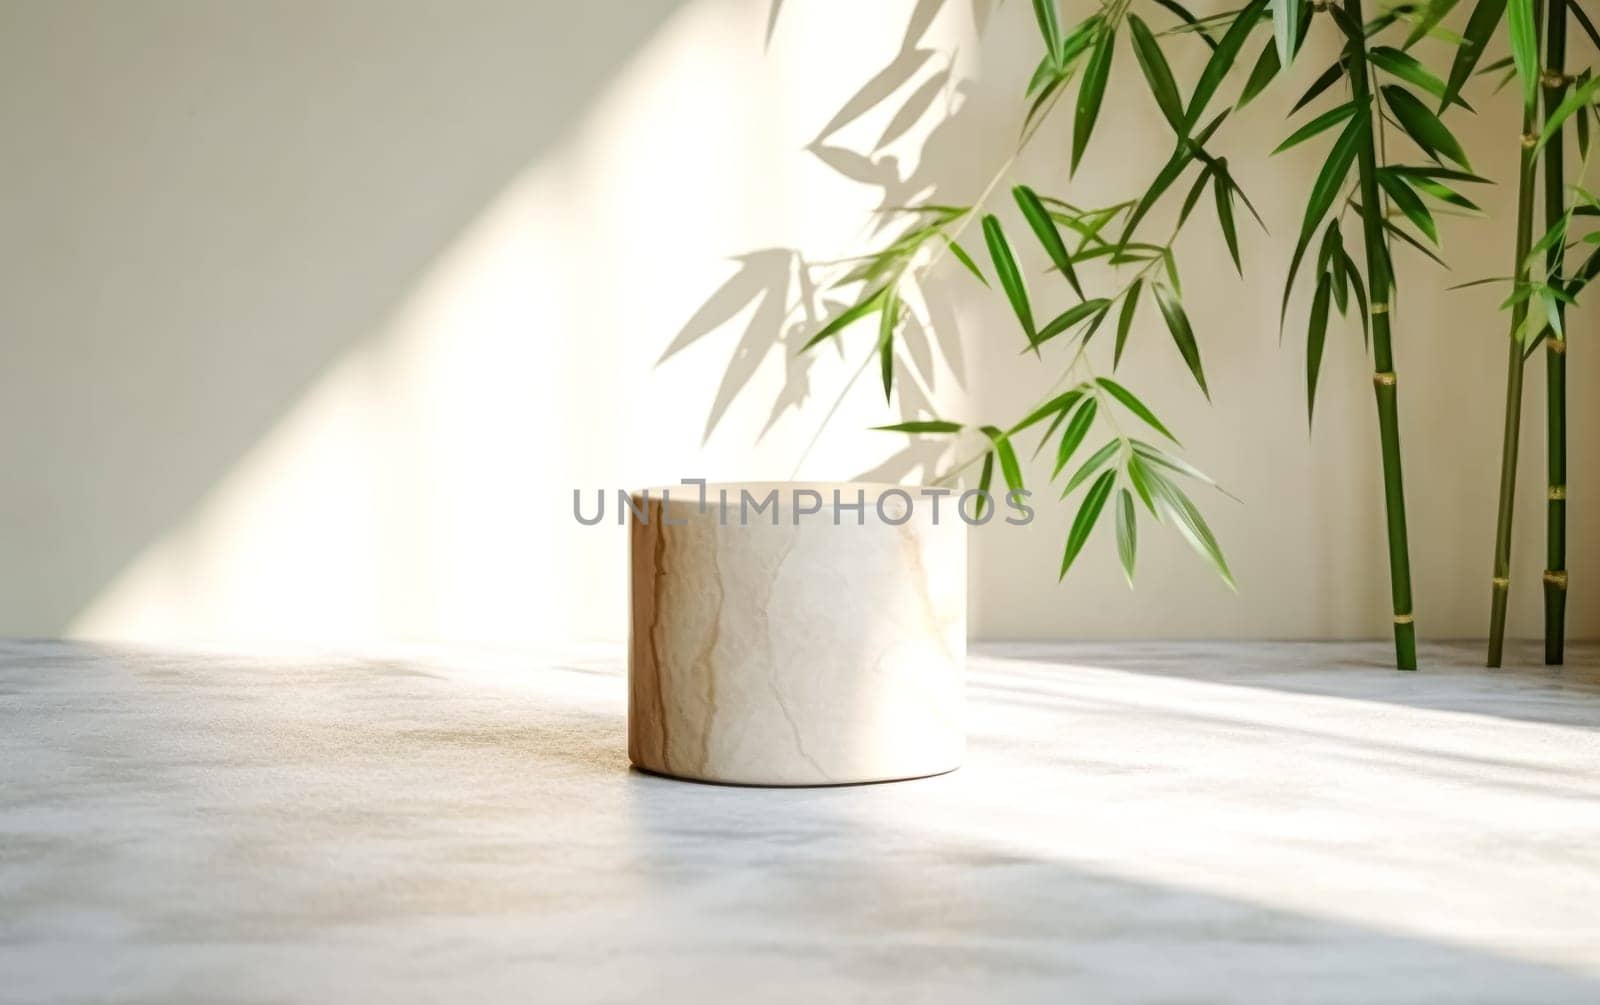 A small white stone table sits in front of a large bamboo plant. The table is empty, and the plant casts a shadow on the floor. The scene is simple and minimalist